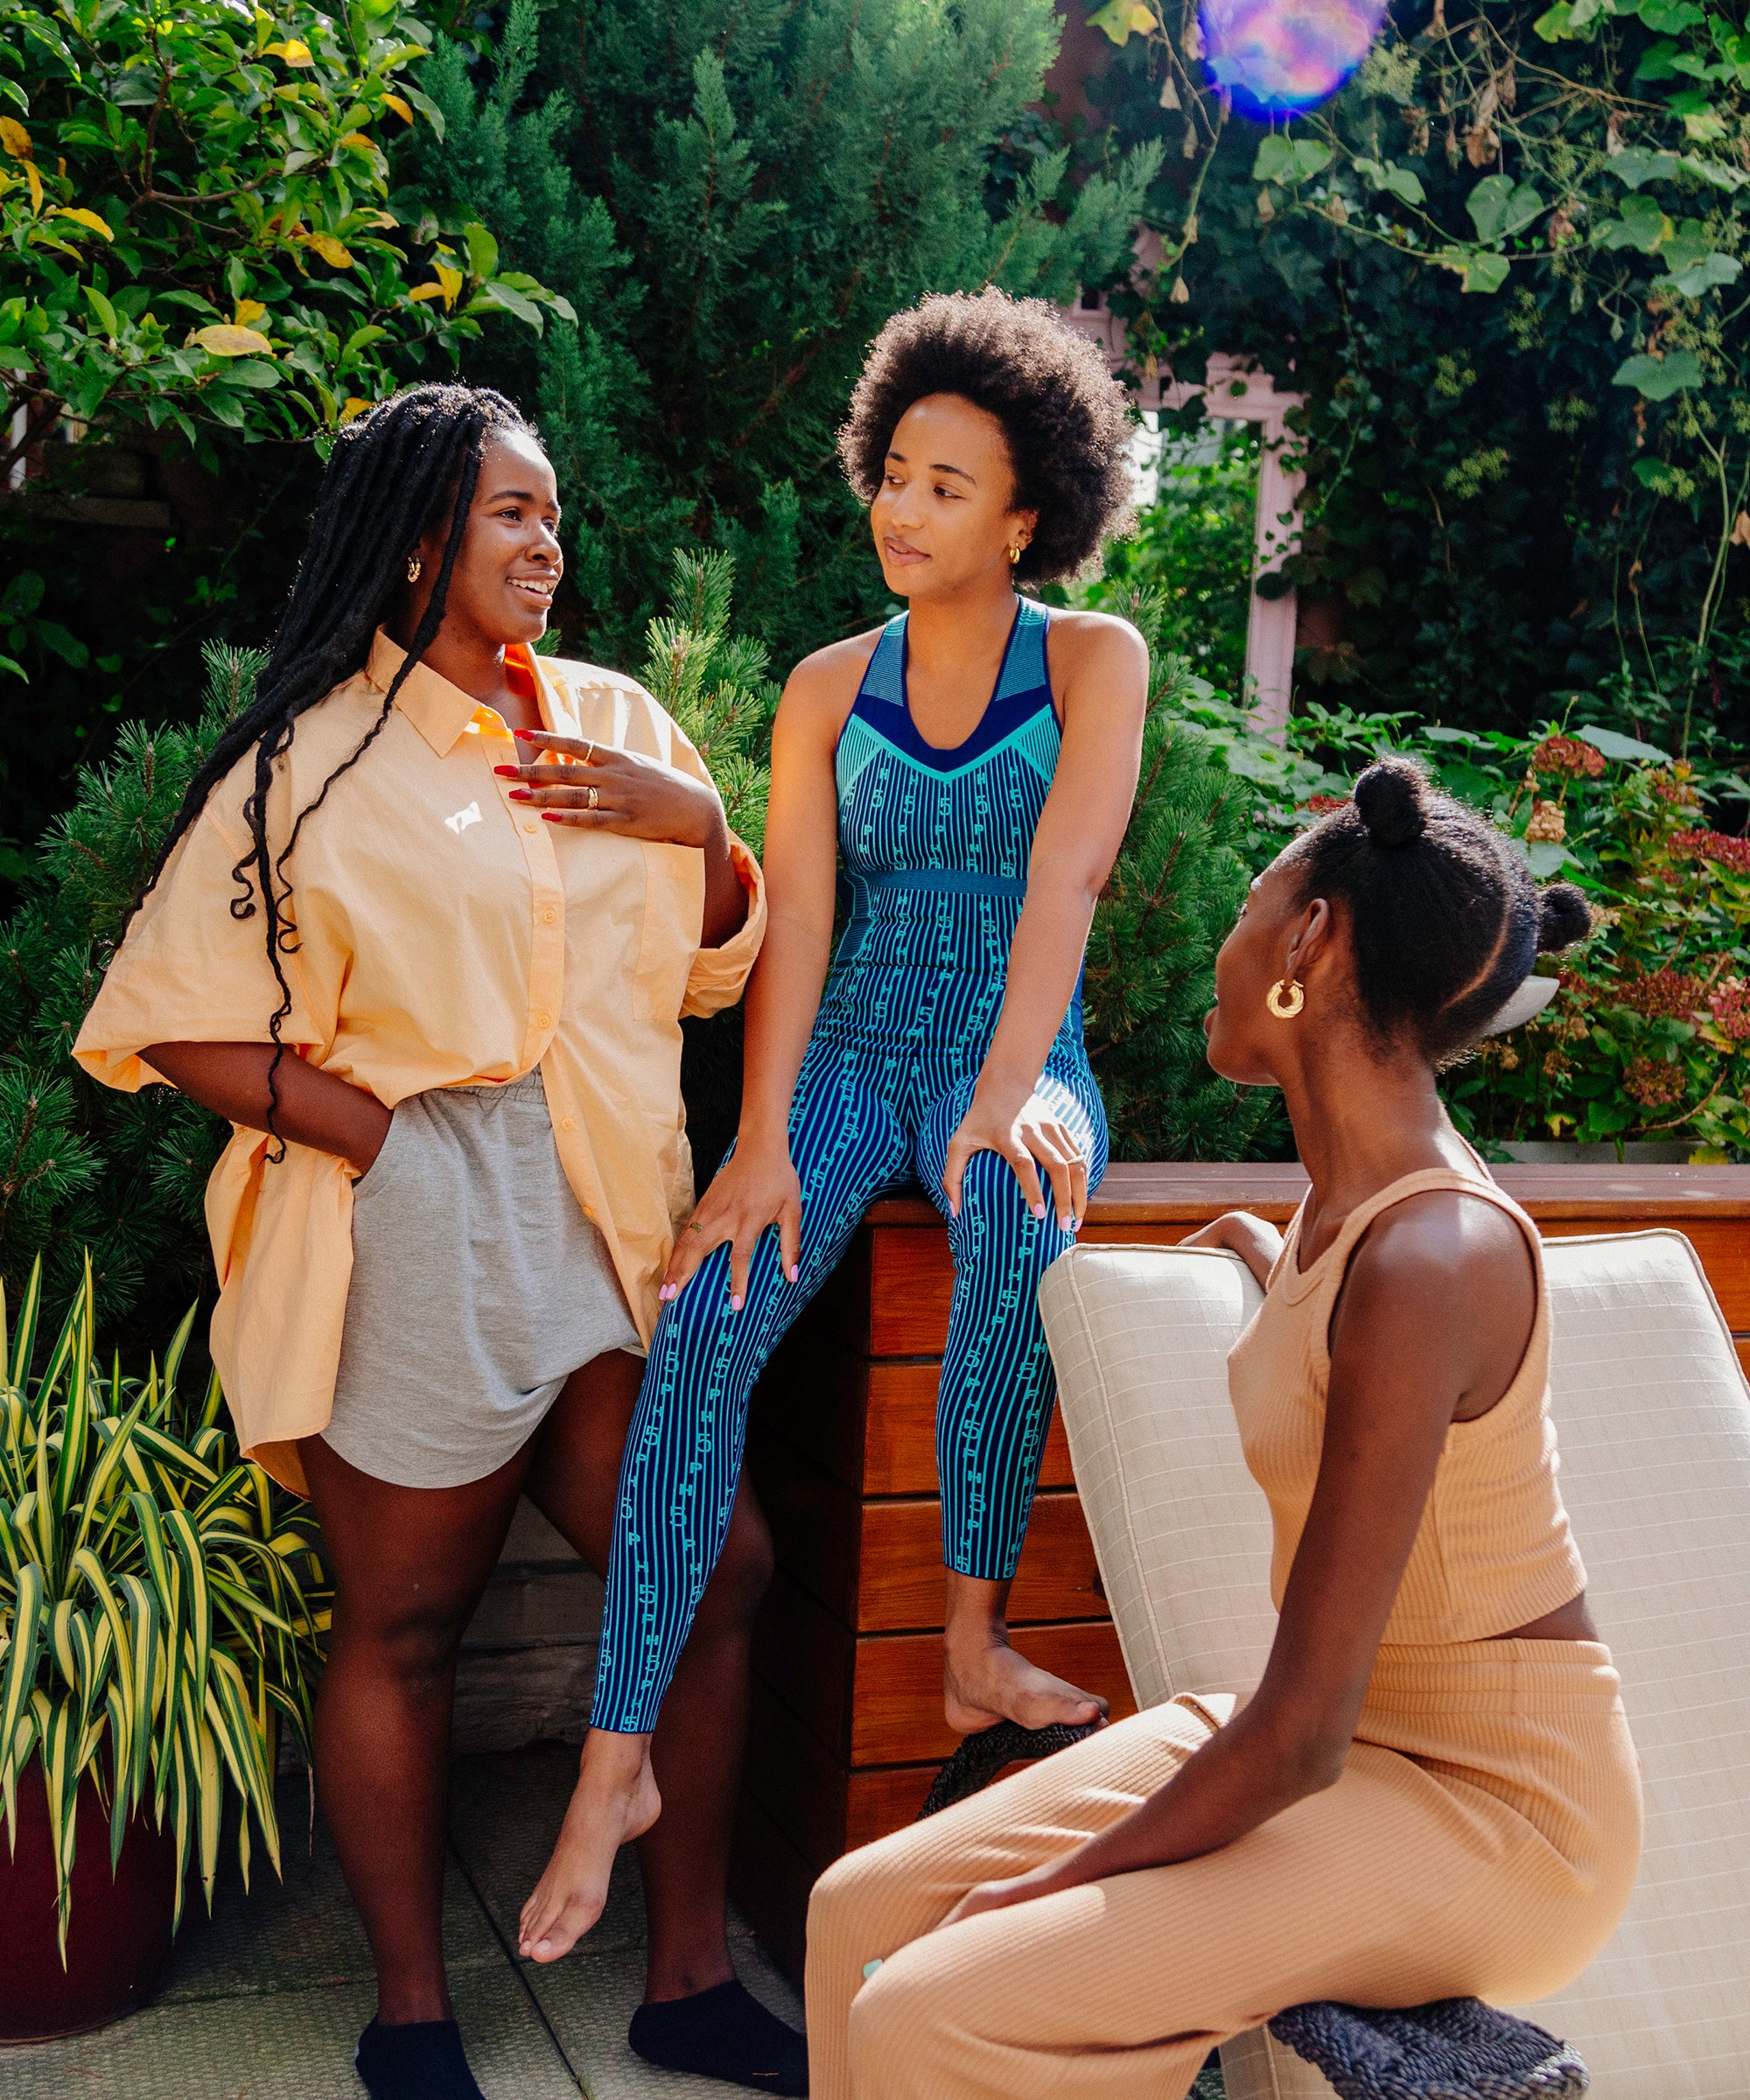 How To Navigate Soft Relationships As A Black Woman